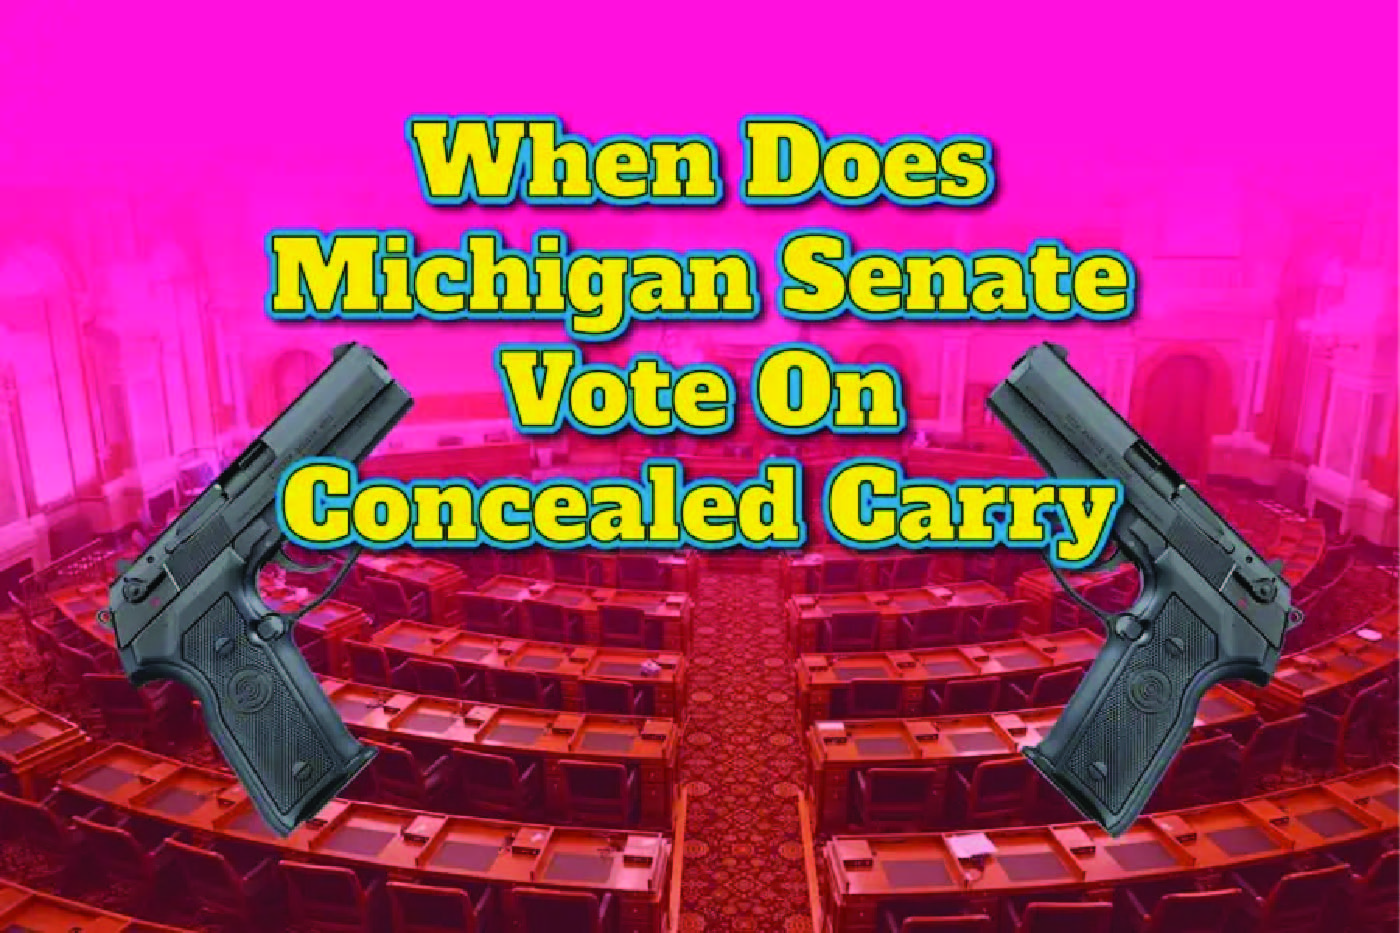 When Does Michigan Senate Vote On Concealed Carry